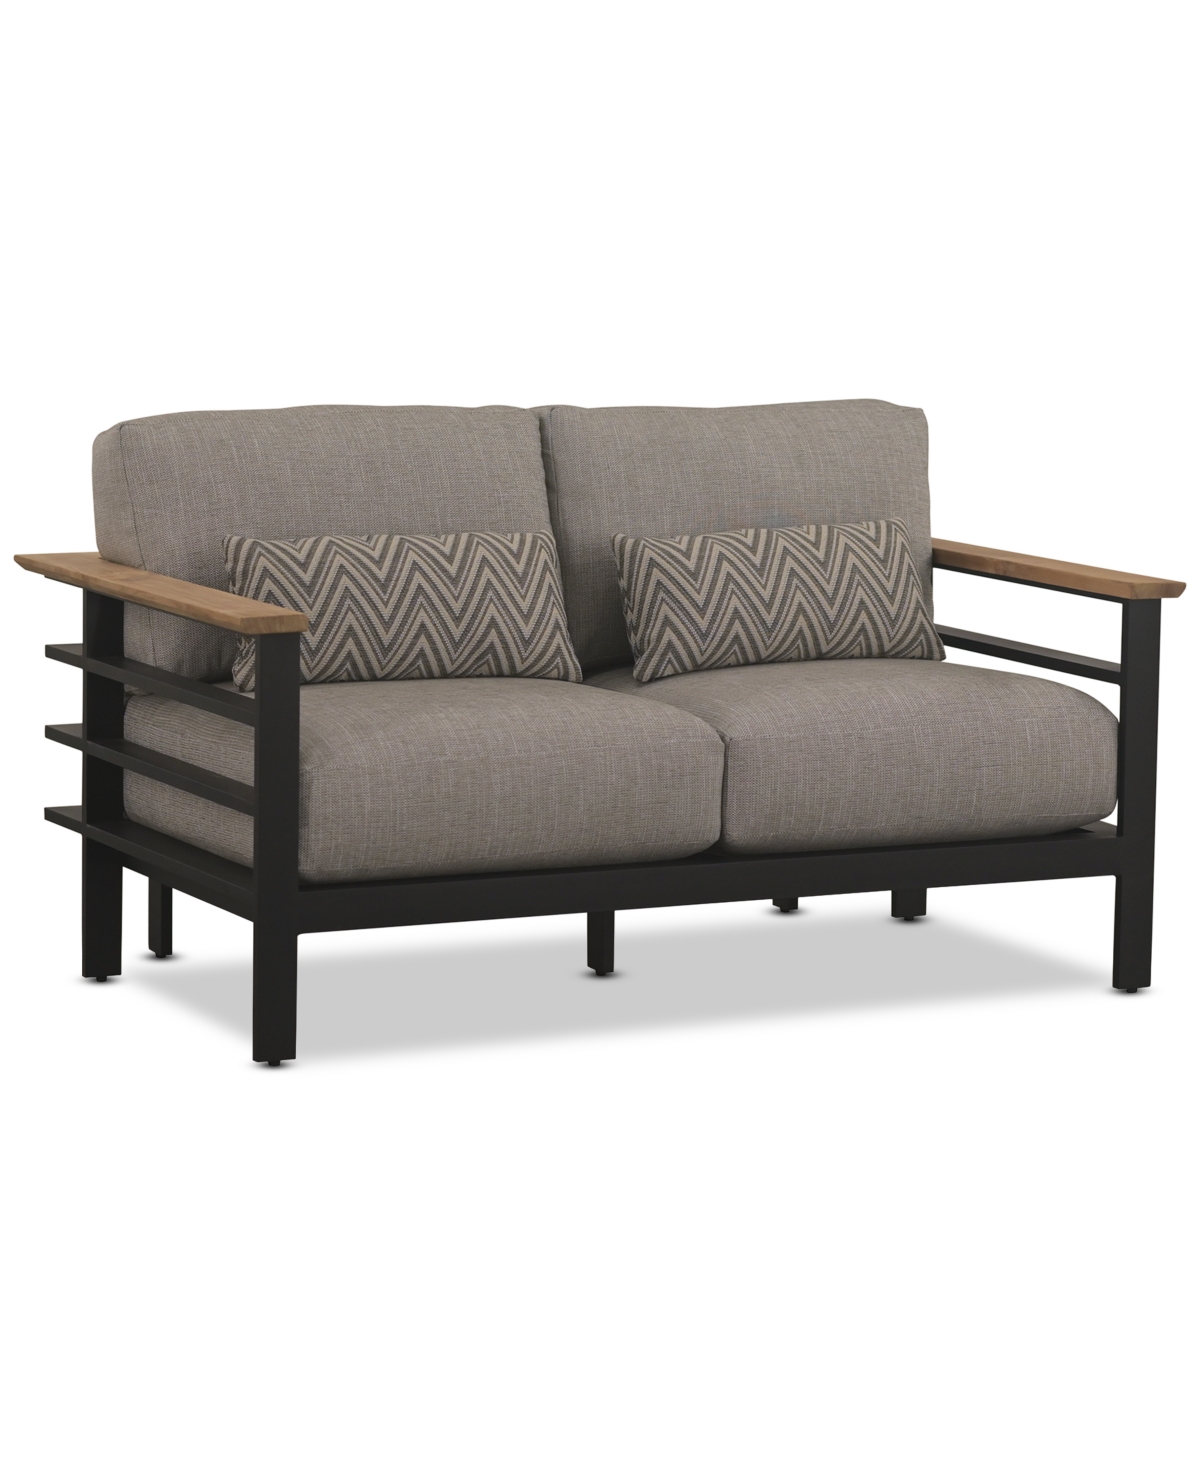 Tommy Bahama South Beach Outdoor Loveseat In Taupe